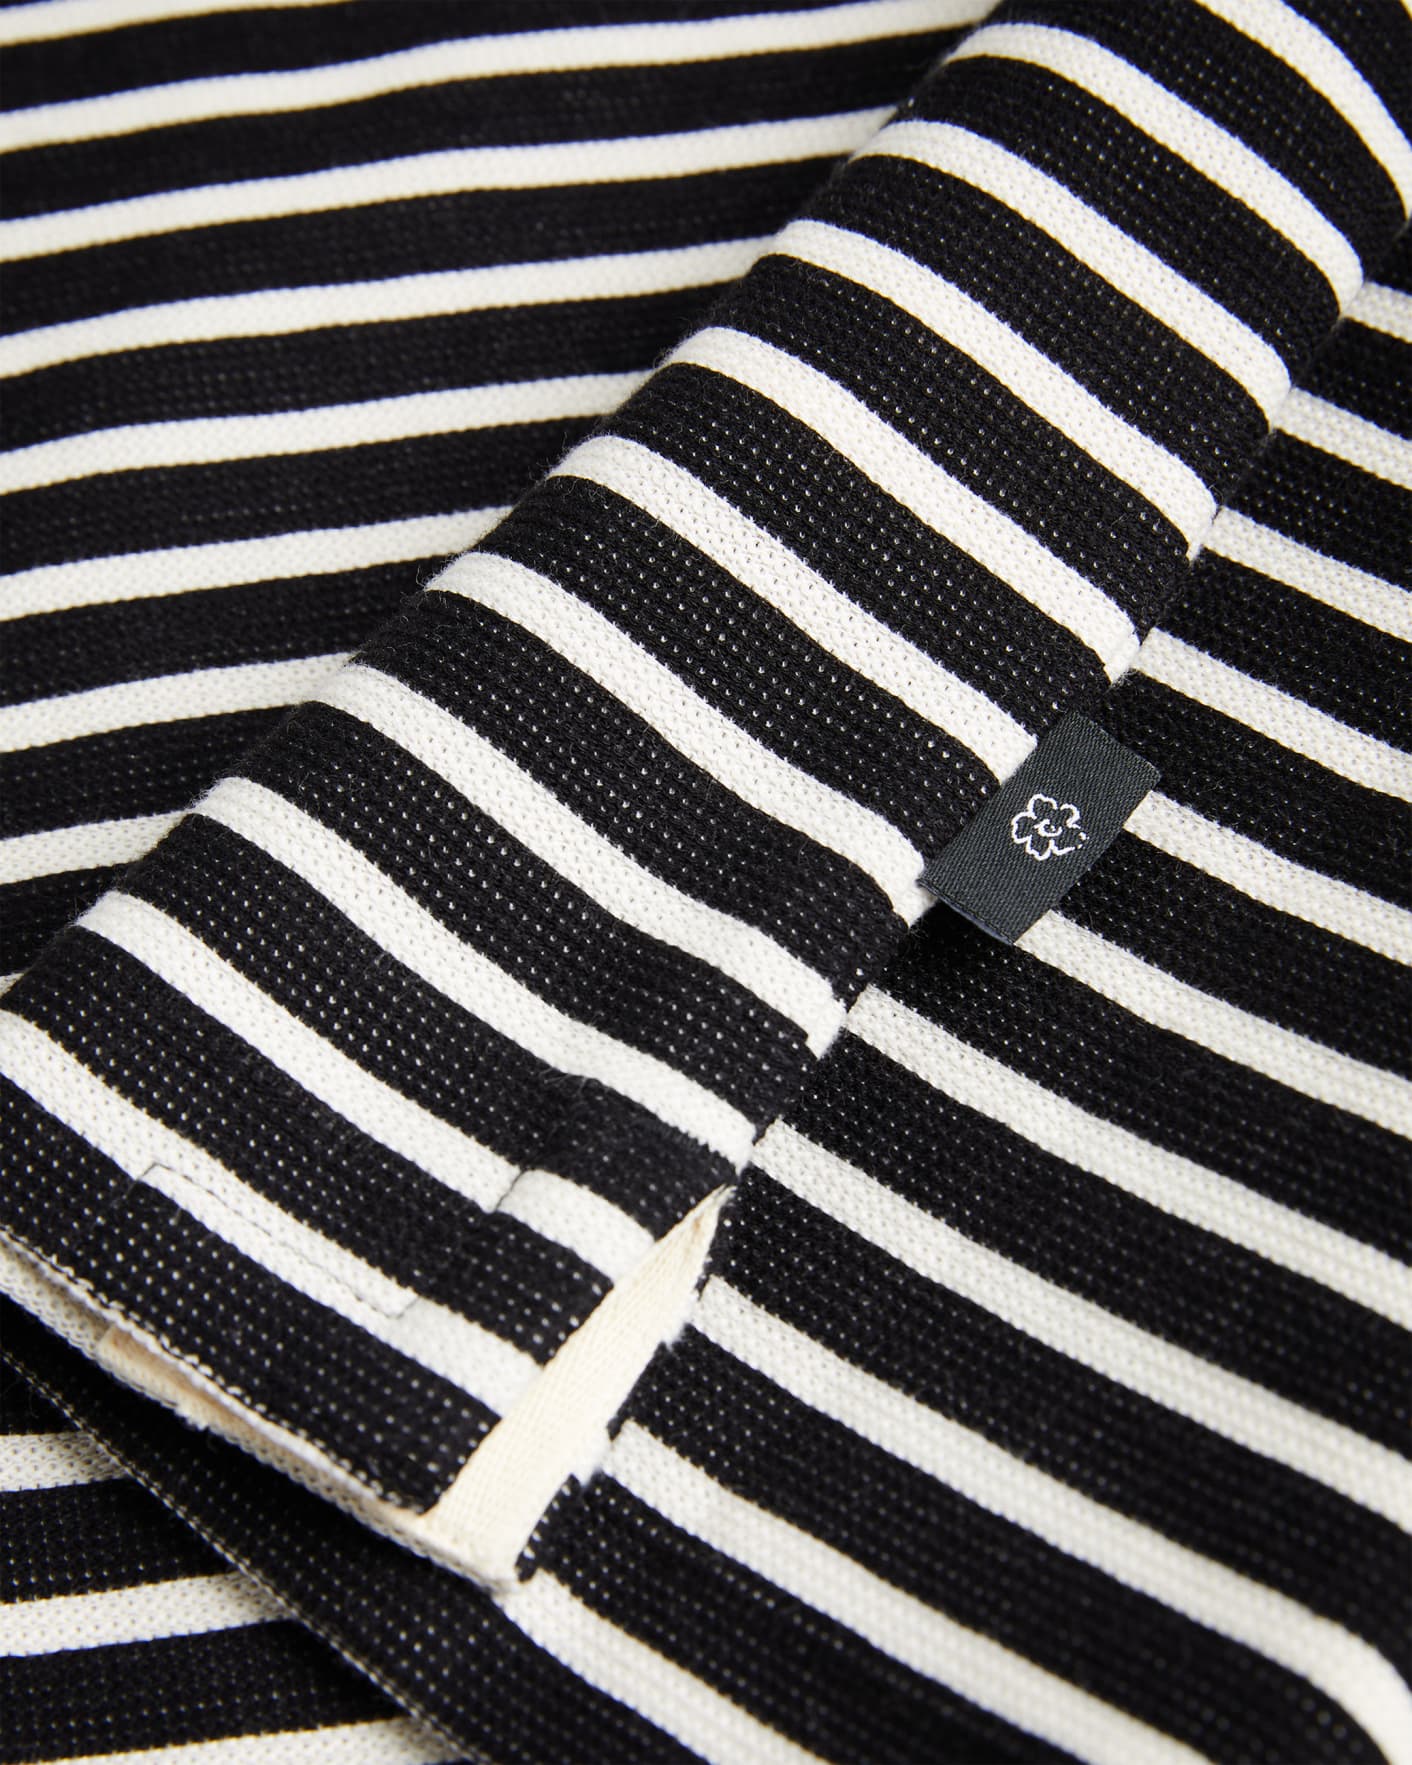 Black Long Sleeve Striped Polo Ted Baker